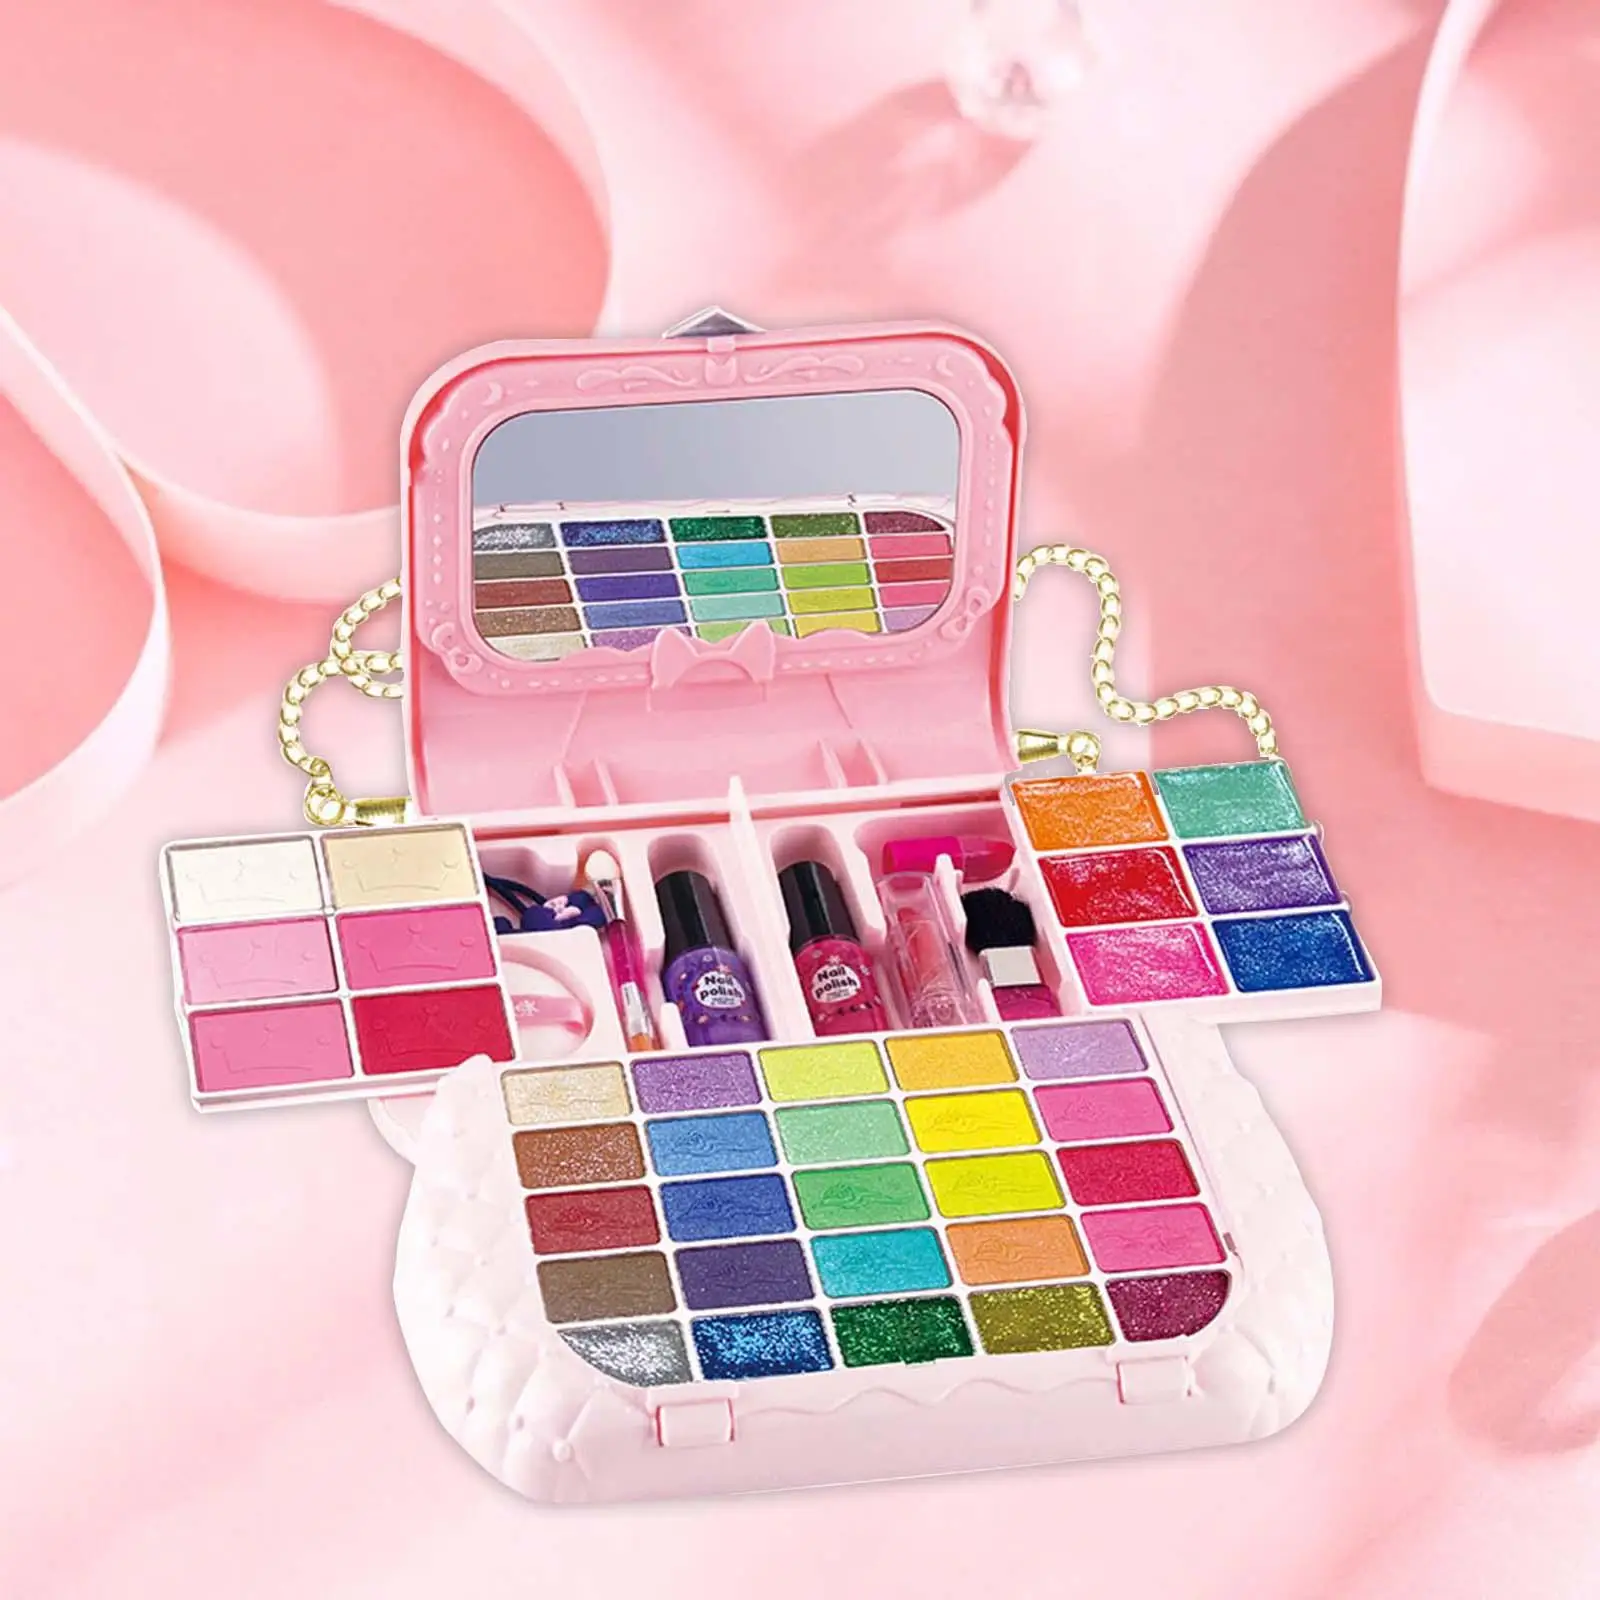 Kids Makeup Kits with Cosmetic Case Pretend Makeup Kits Role Play Games for Children